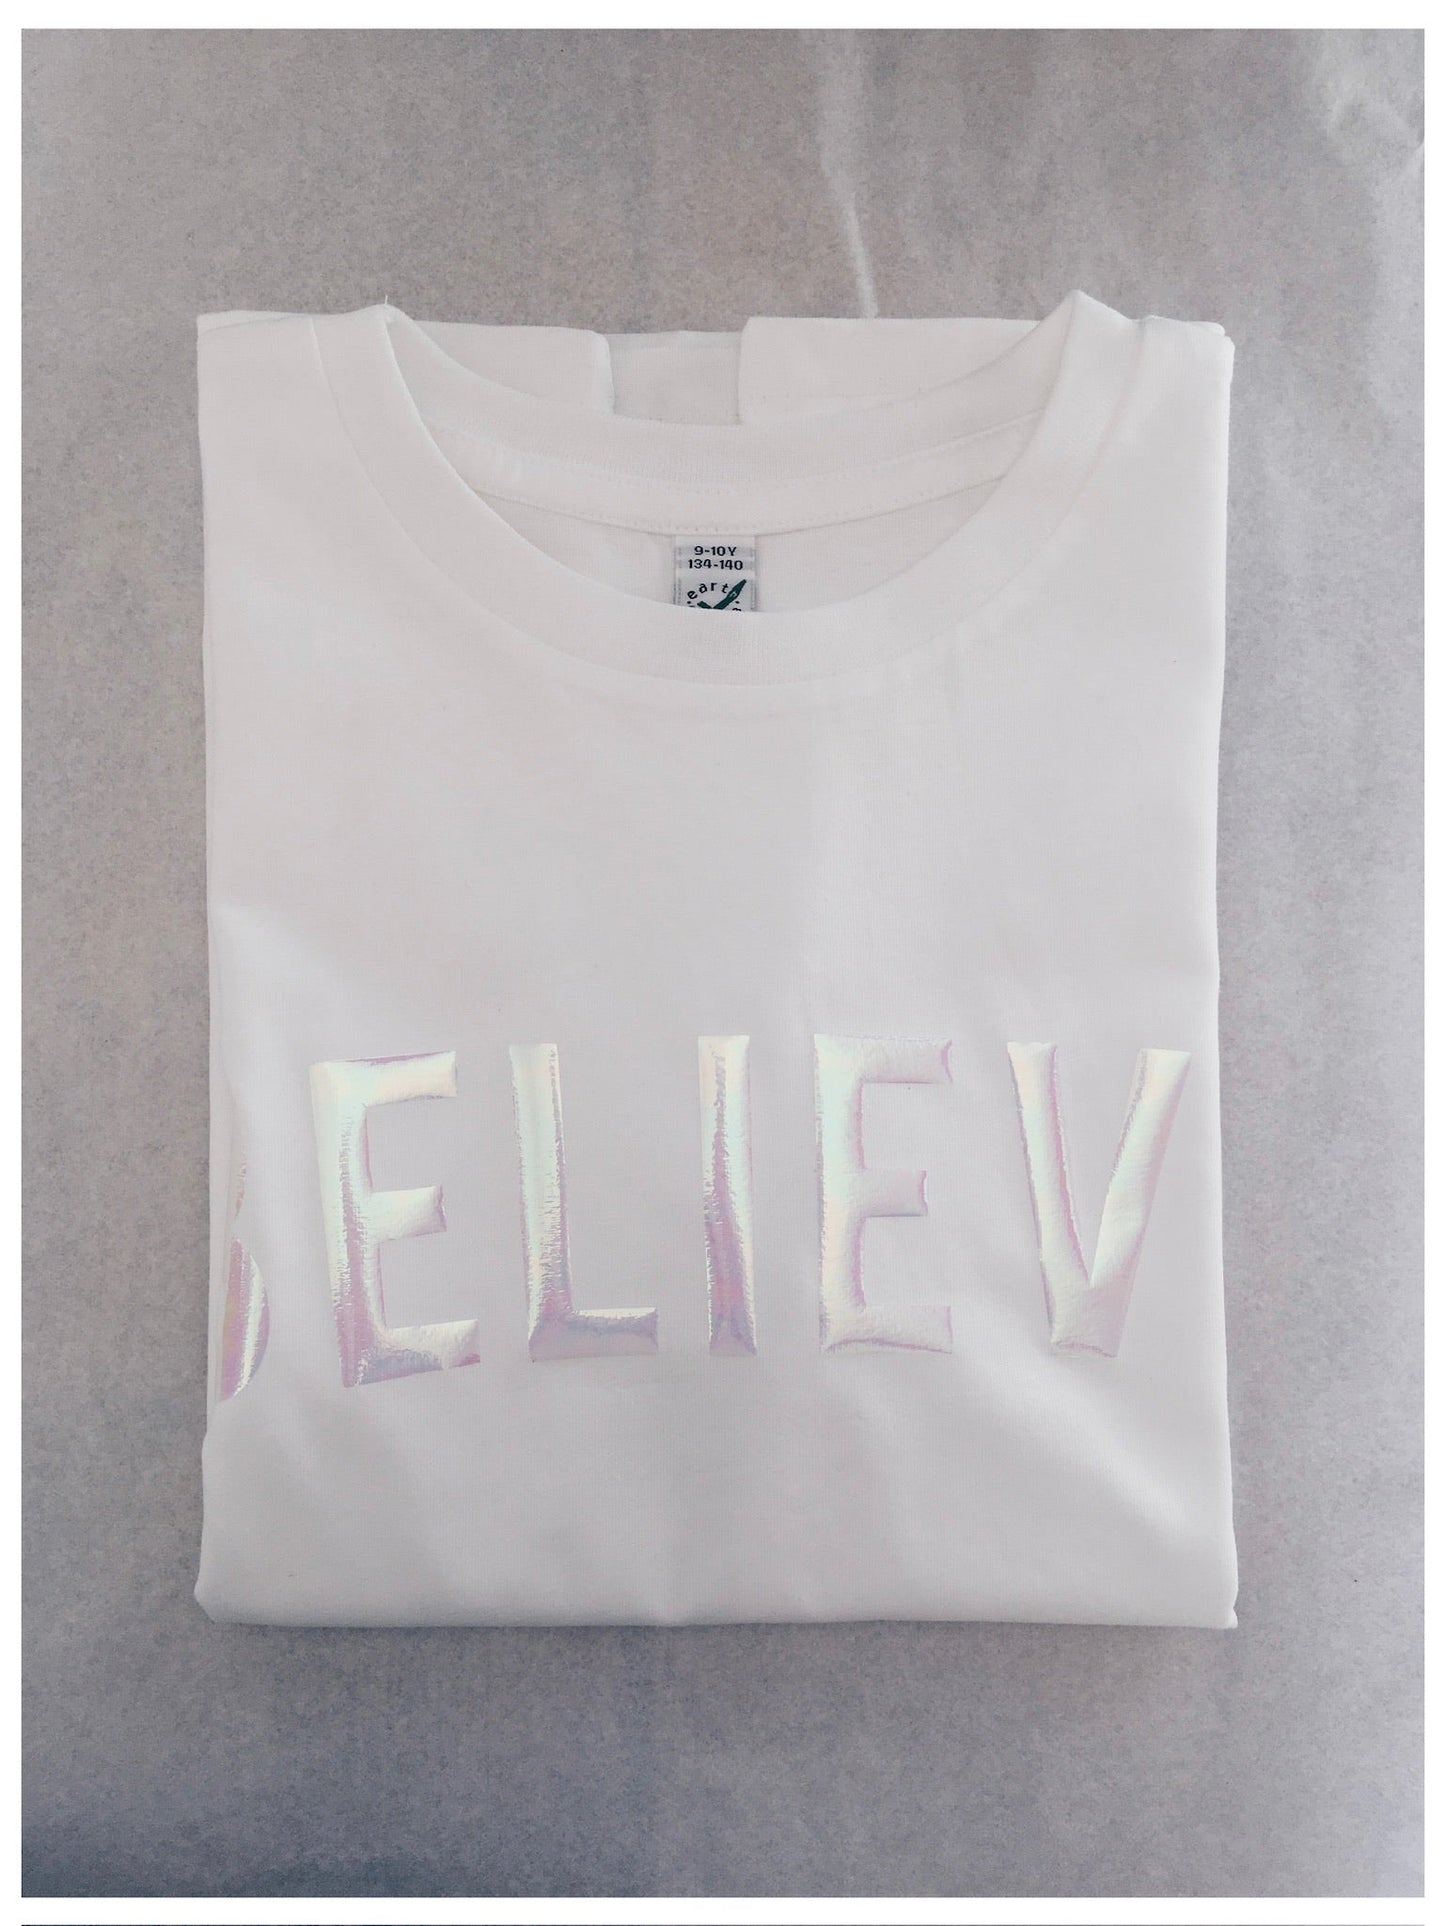 Iridescent Pearl print on folded white Believe t-shirt by For Just ONE Day